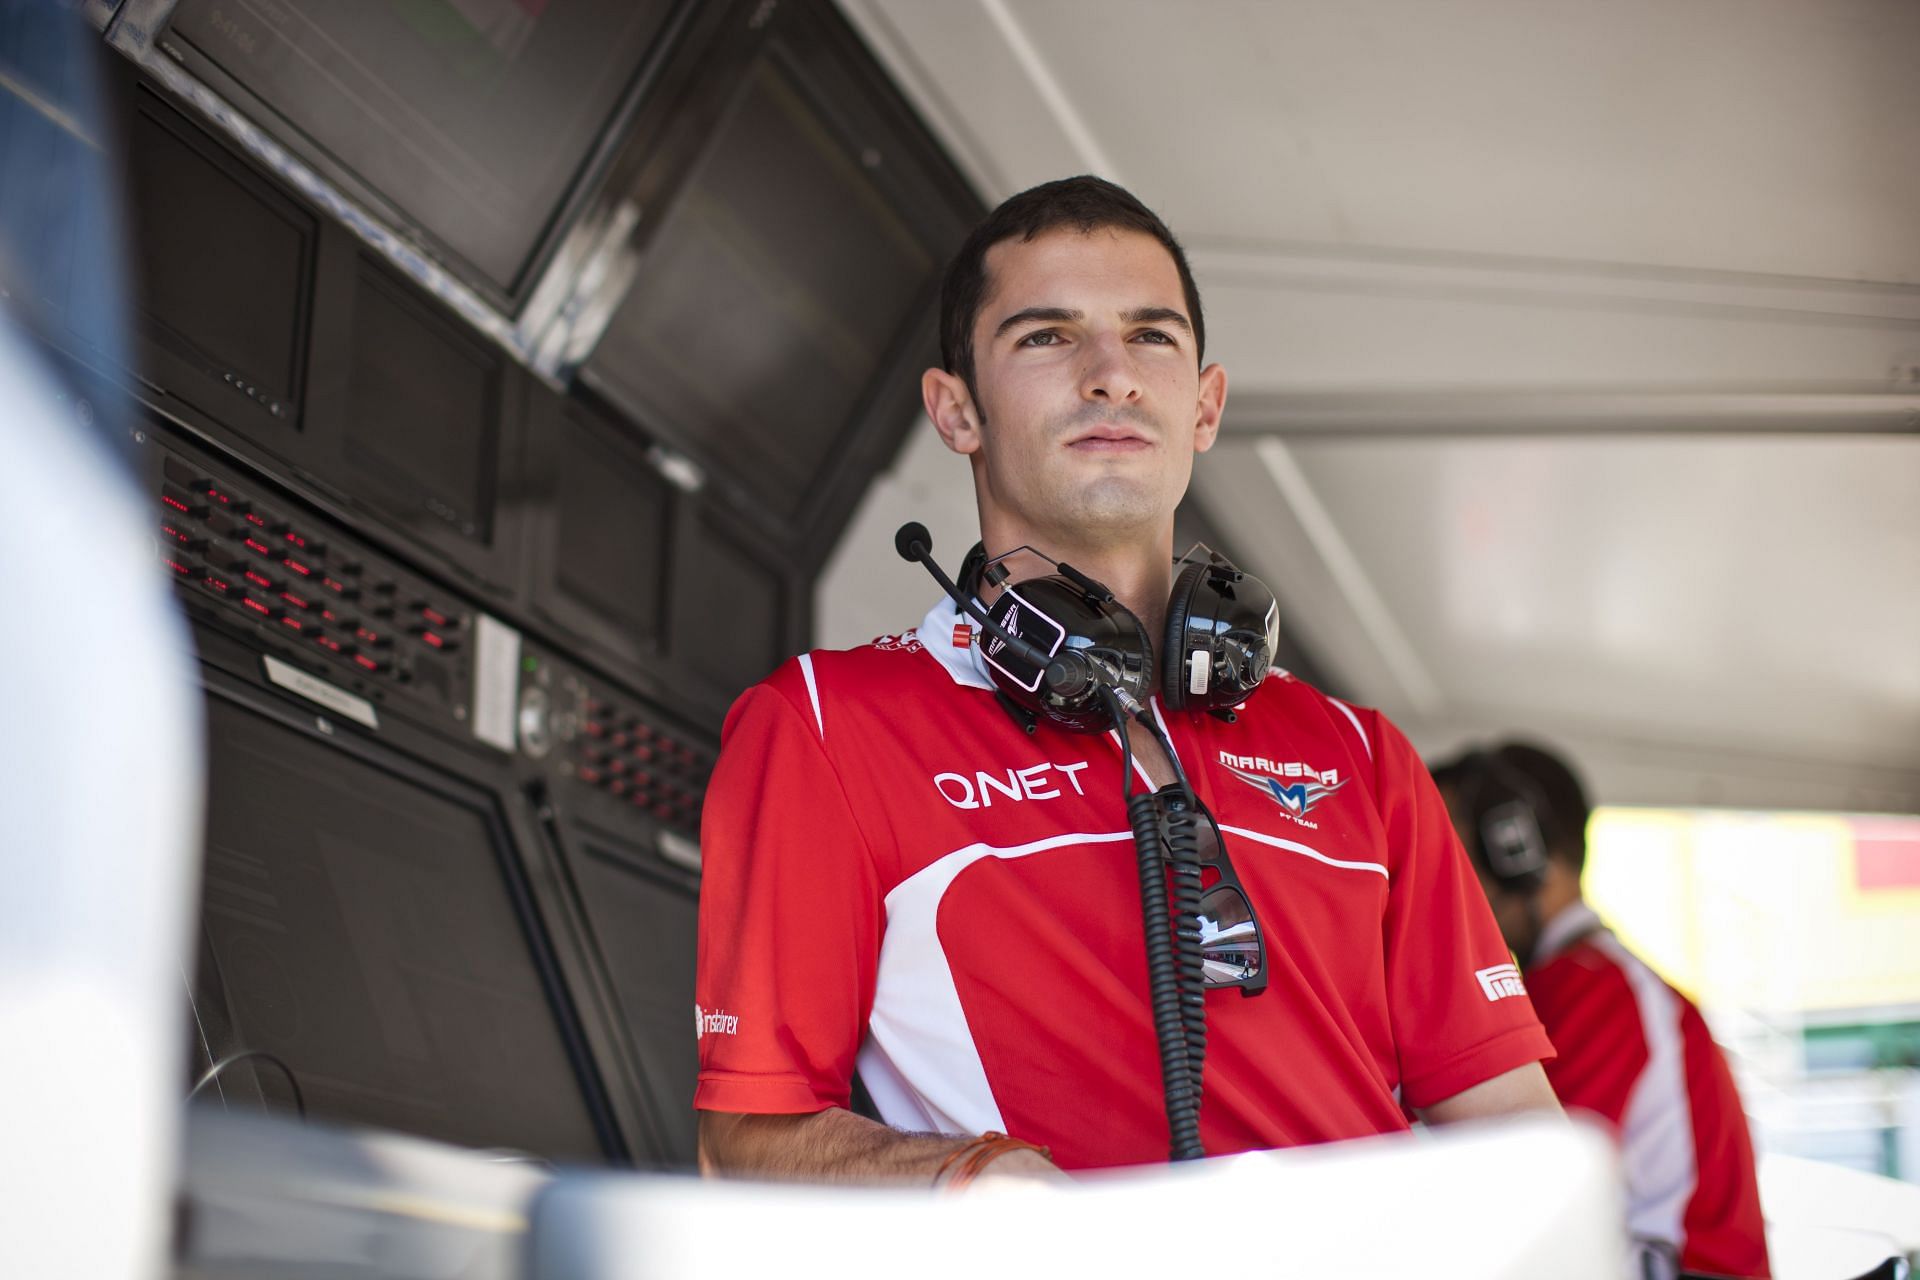 Alexander Rossi during his time with Marussia at the Hungarian Formula One Grand Prix on July 25, 2014 (Photo by Drew Gibson/Getty Images)